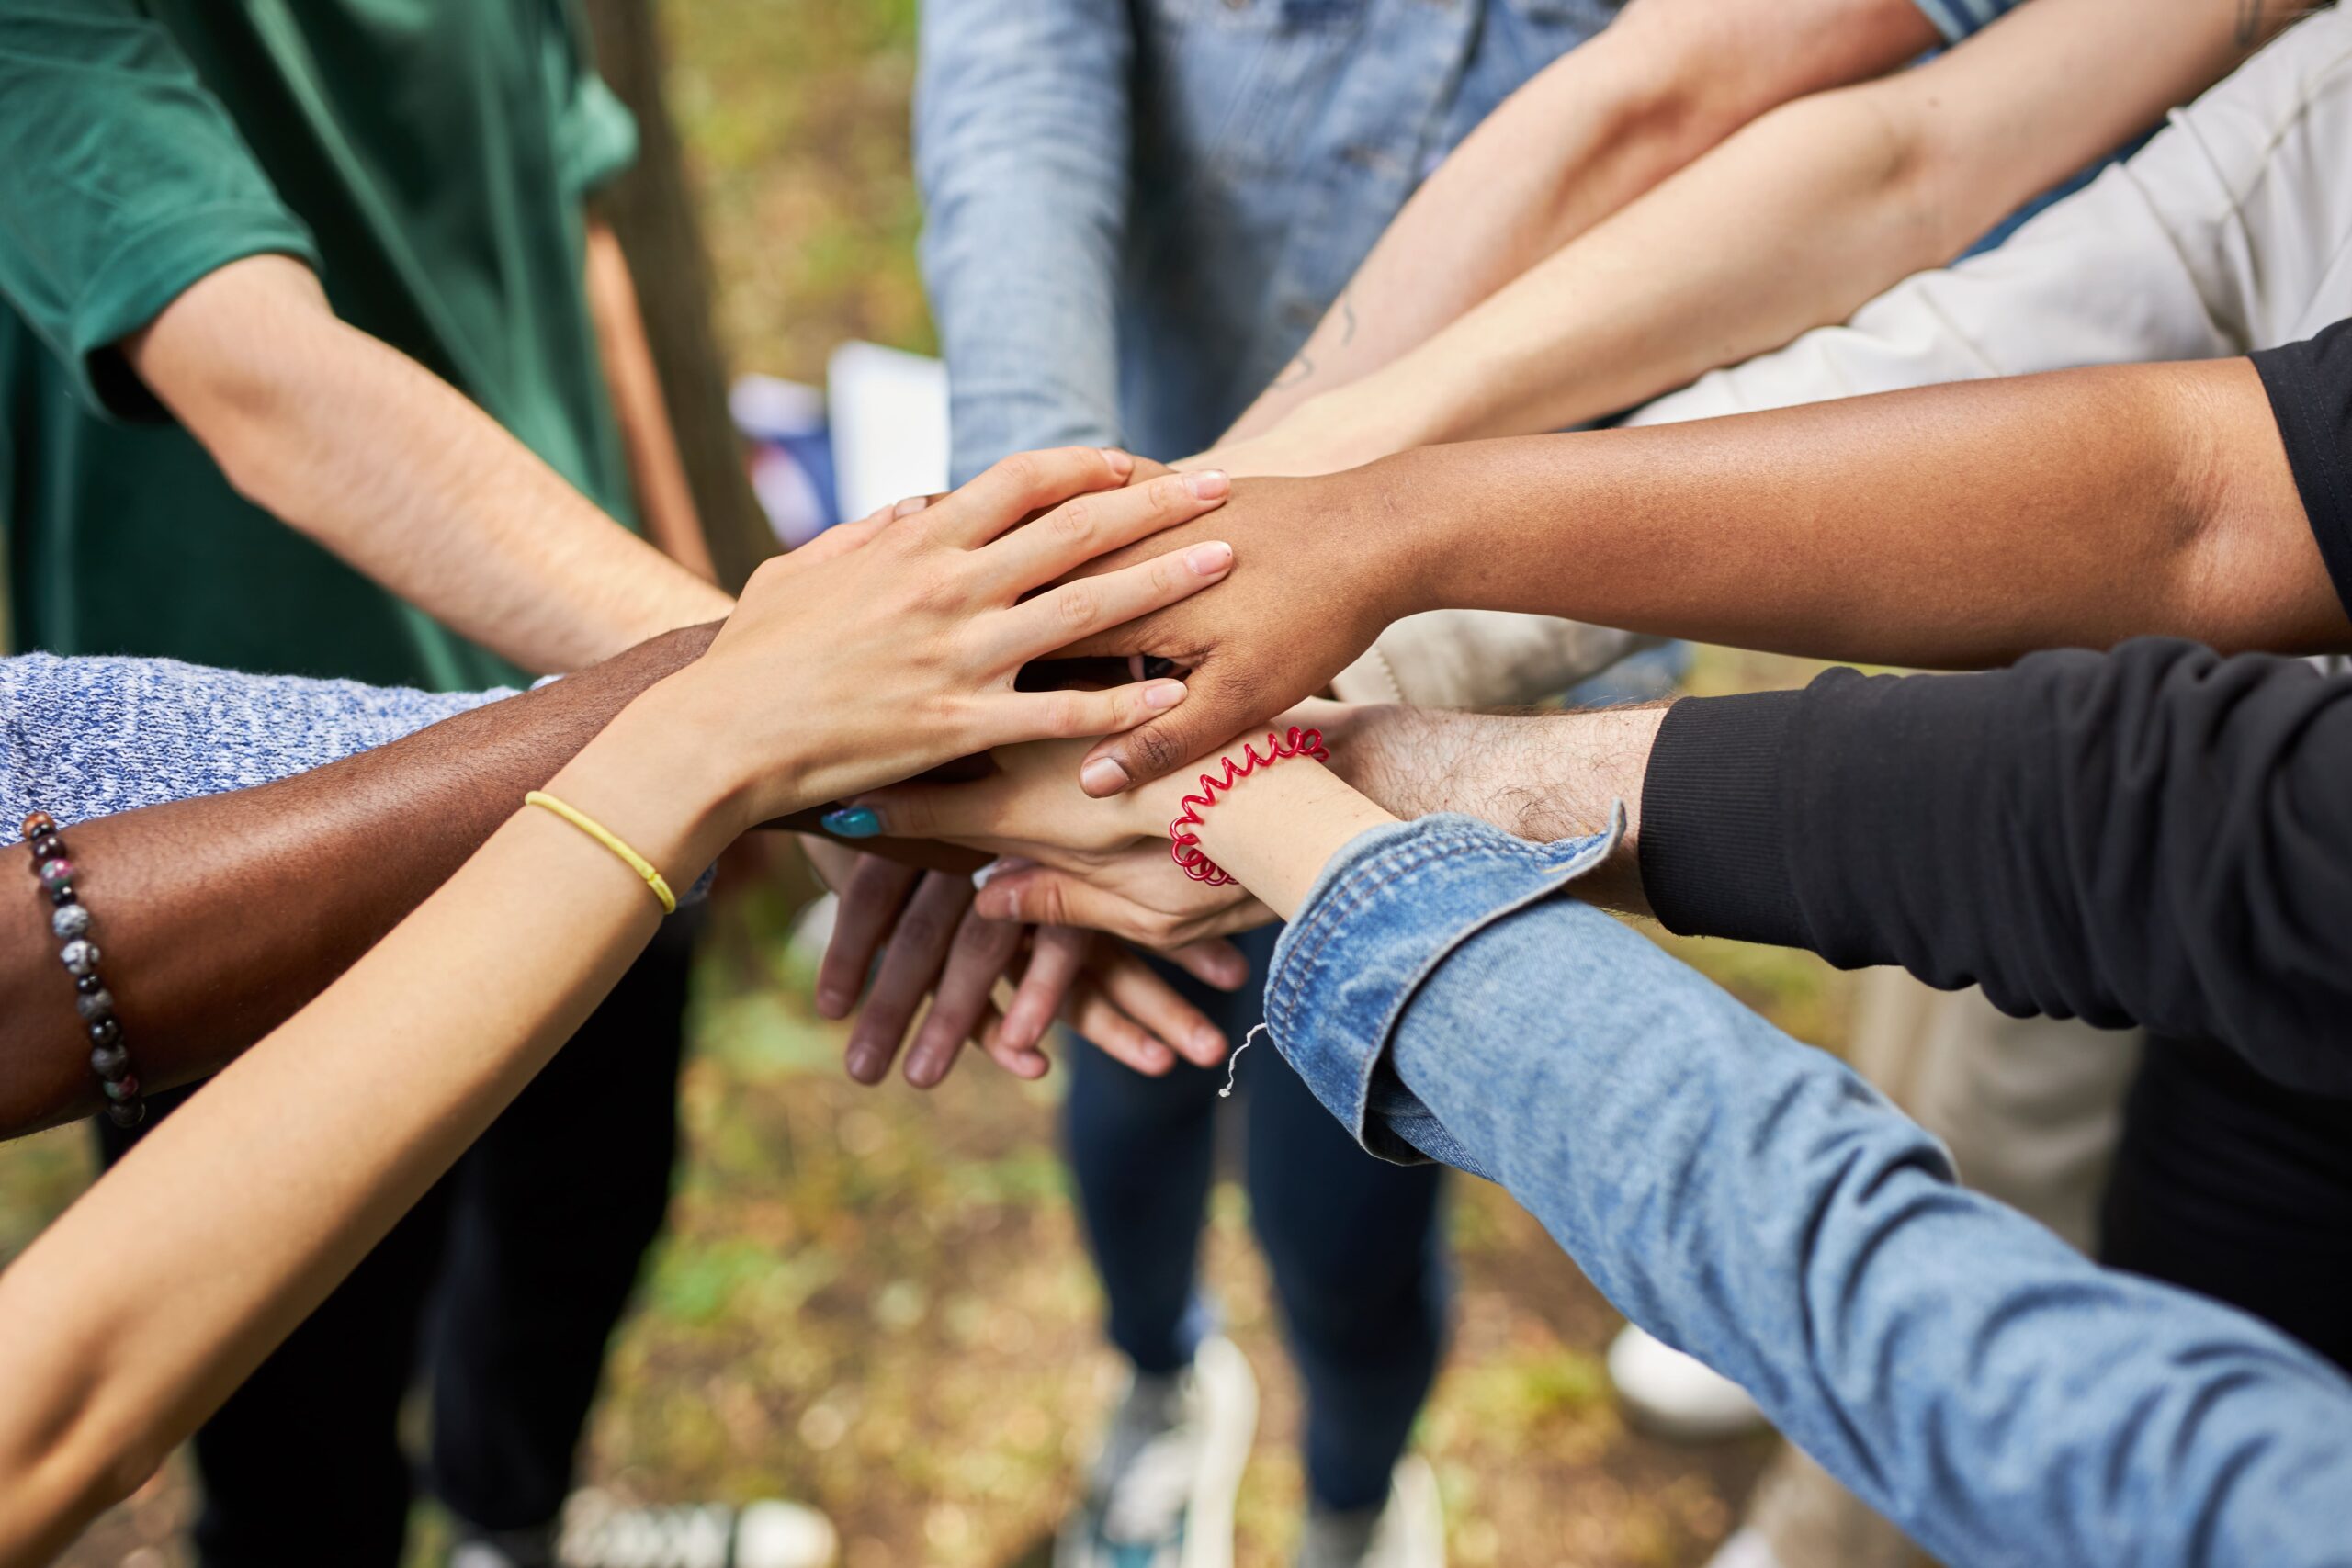 A Diverse Group Stands United, Holding Hands in a Gesture of Solidarity and Connection